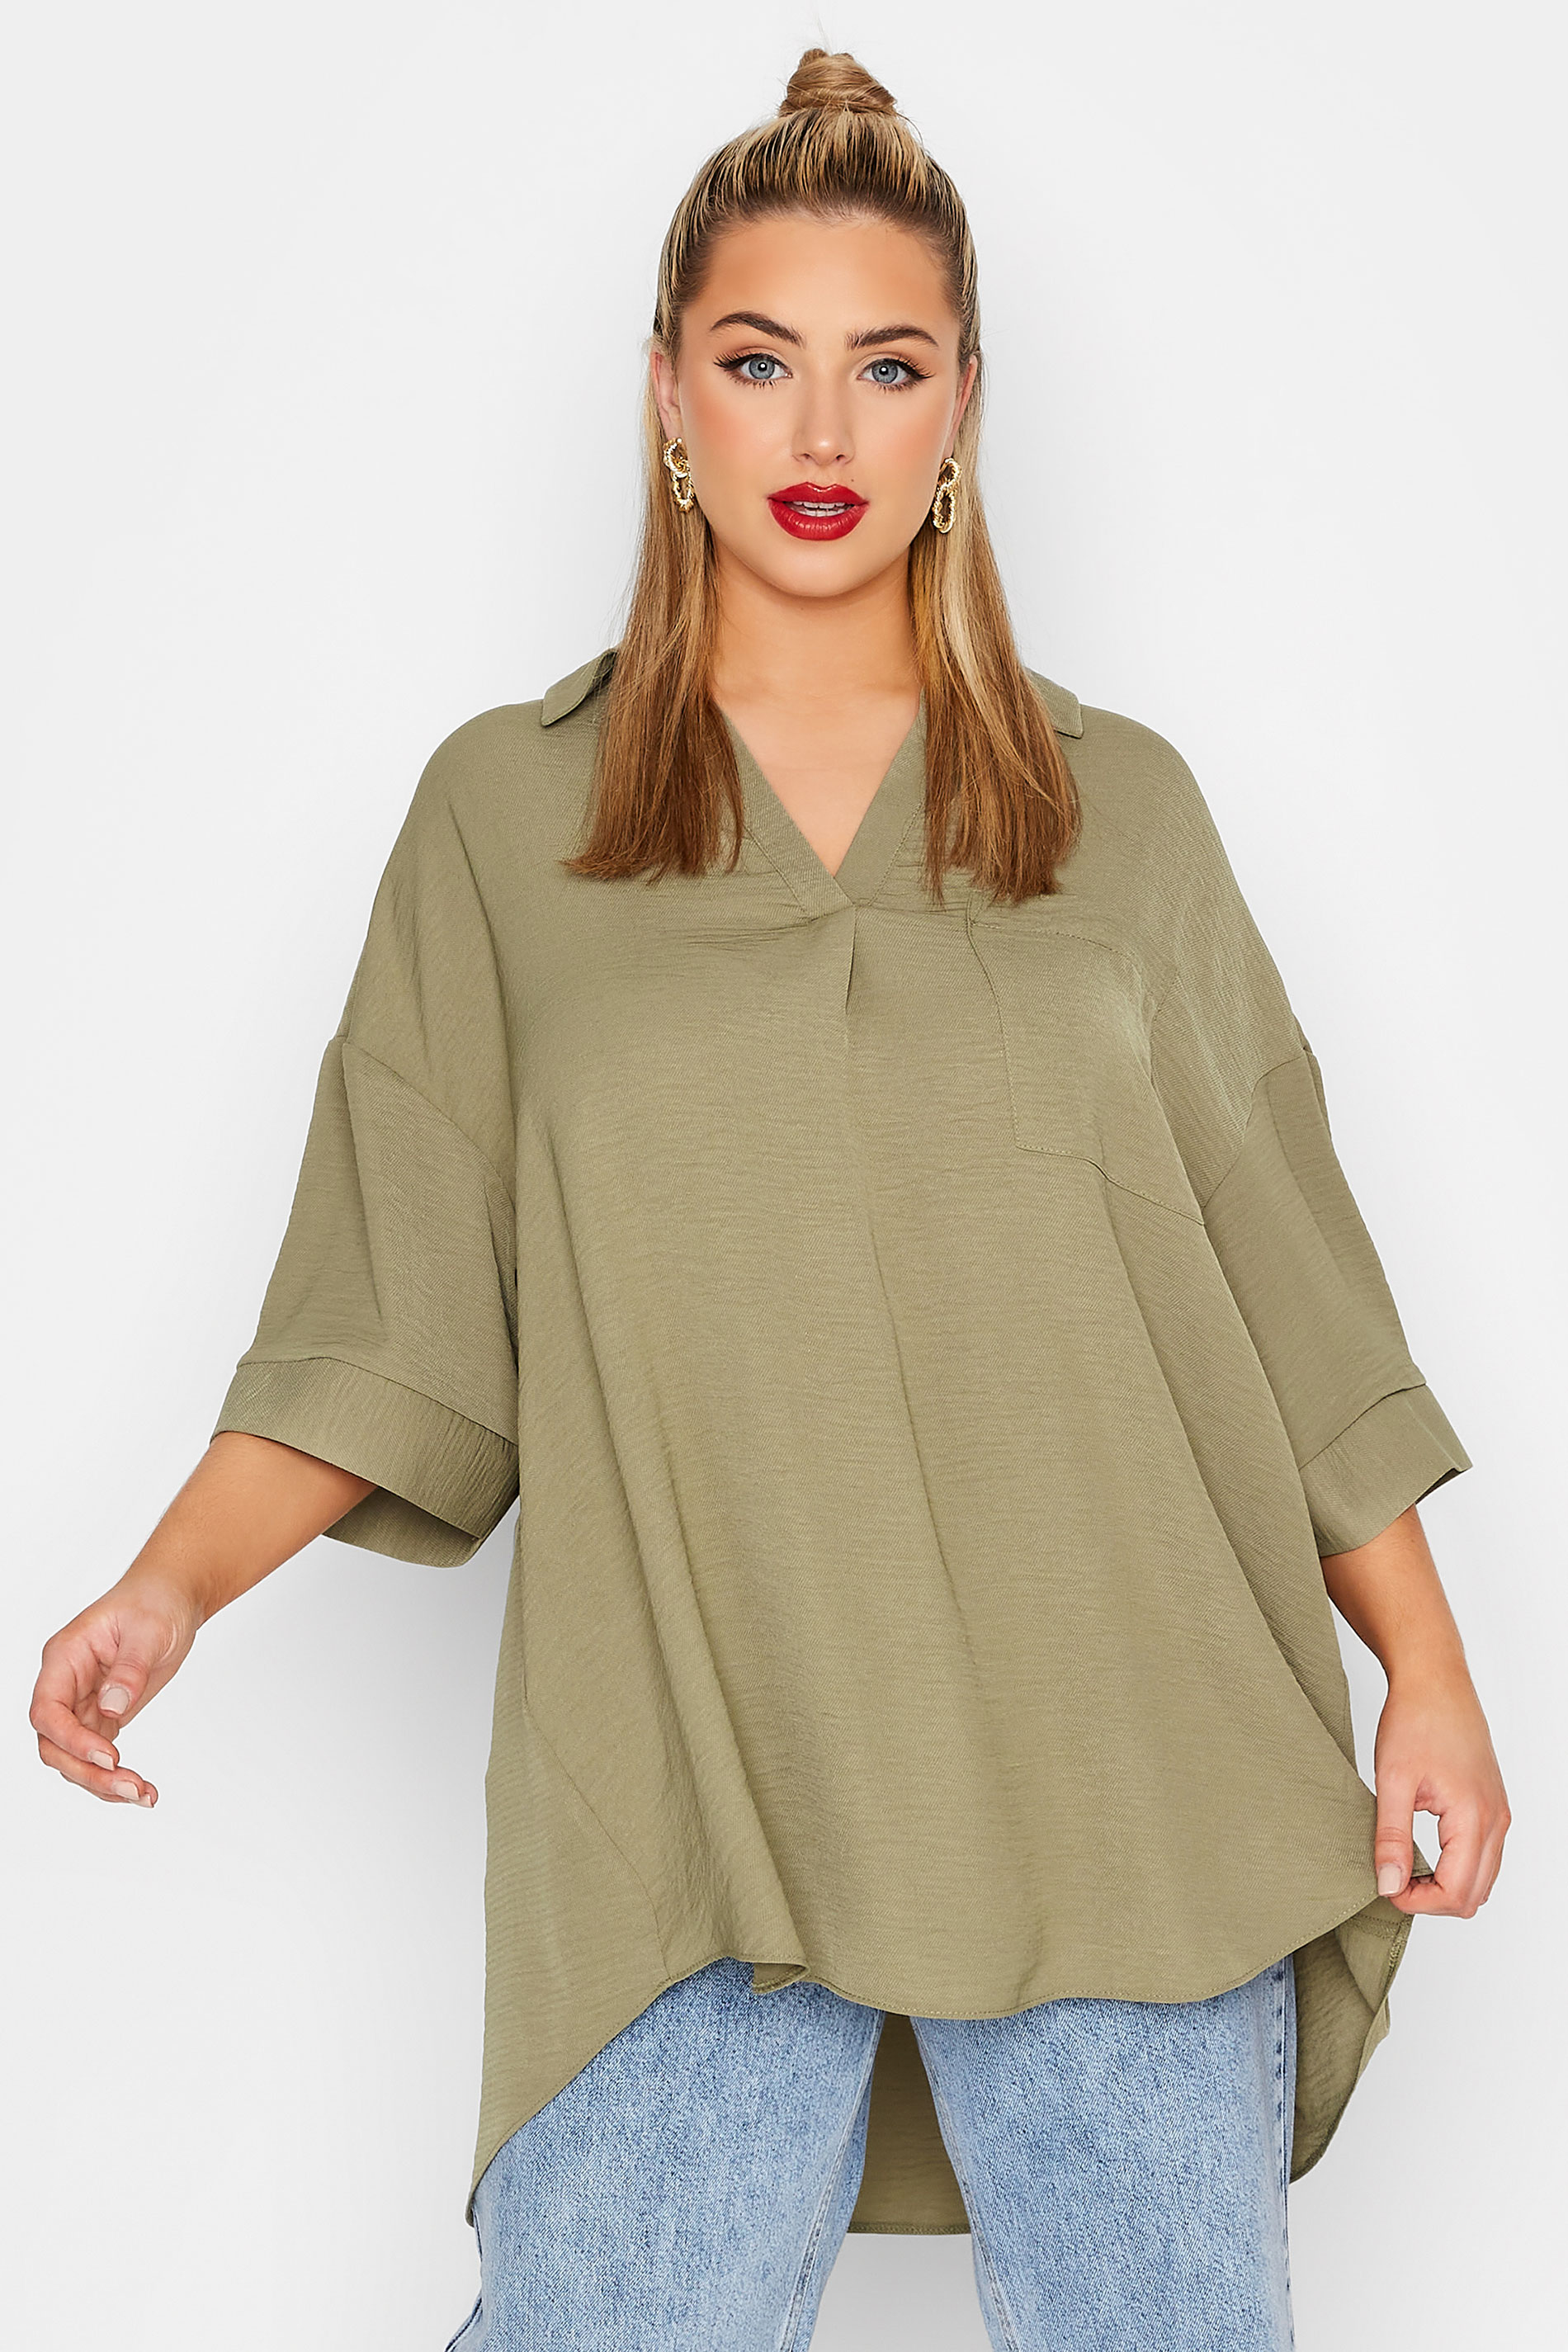 LIMITED COLLECTION Curve Olive Green Pleated Front Top_A.jpg